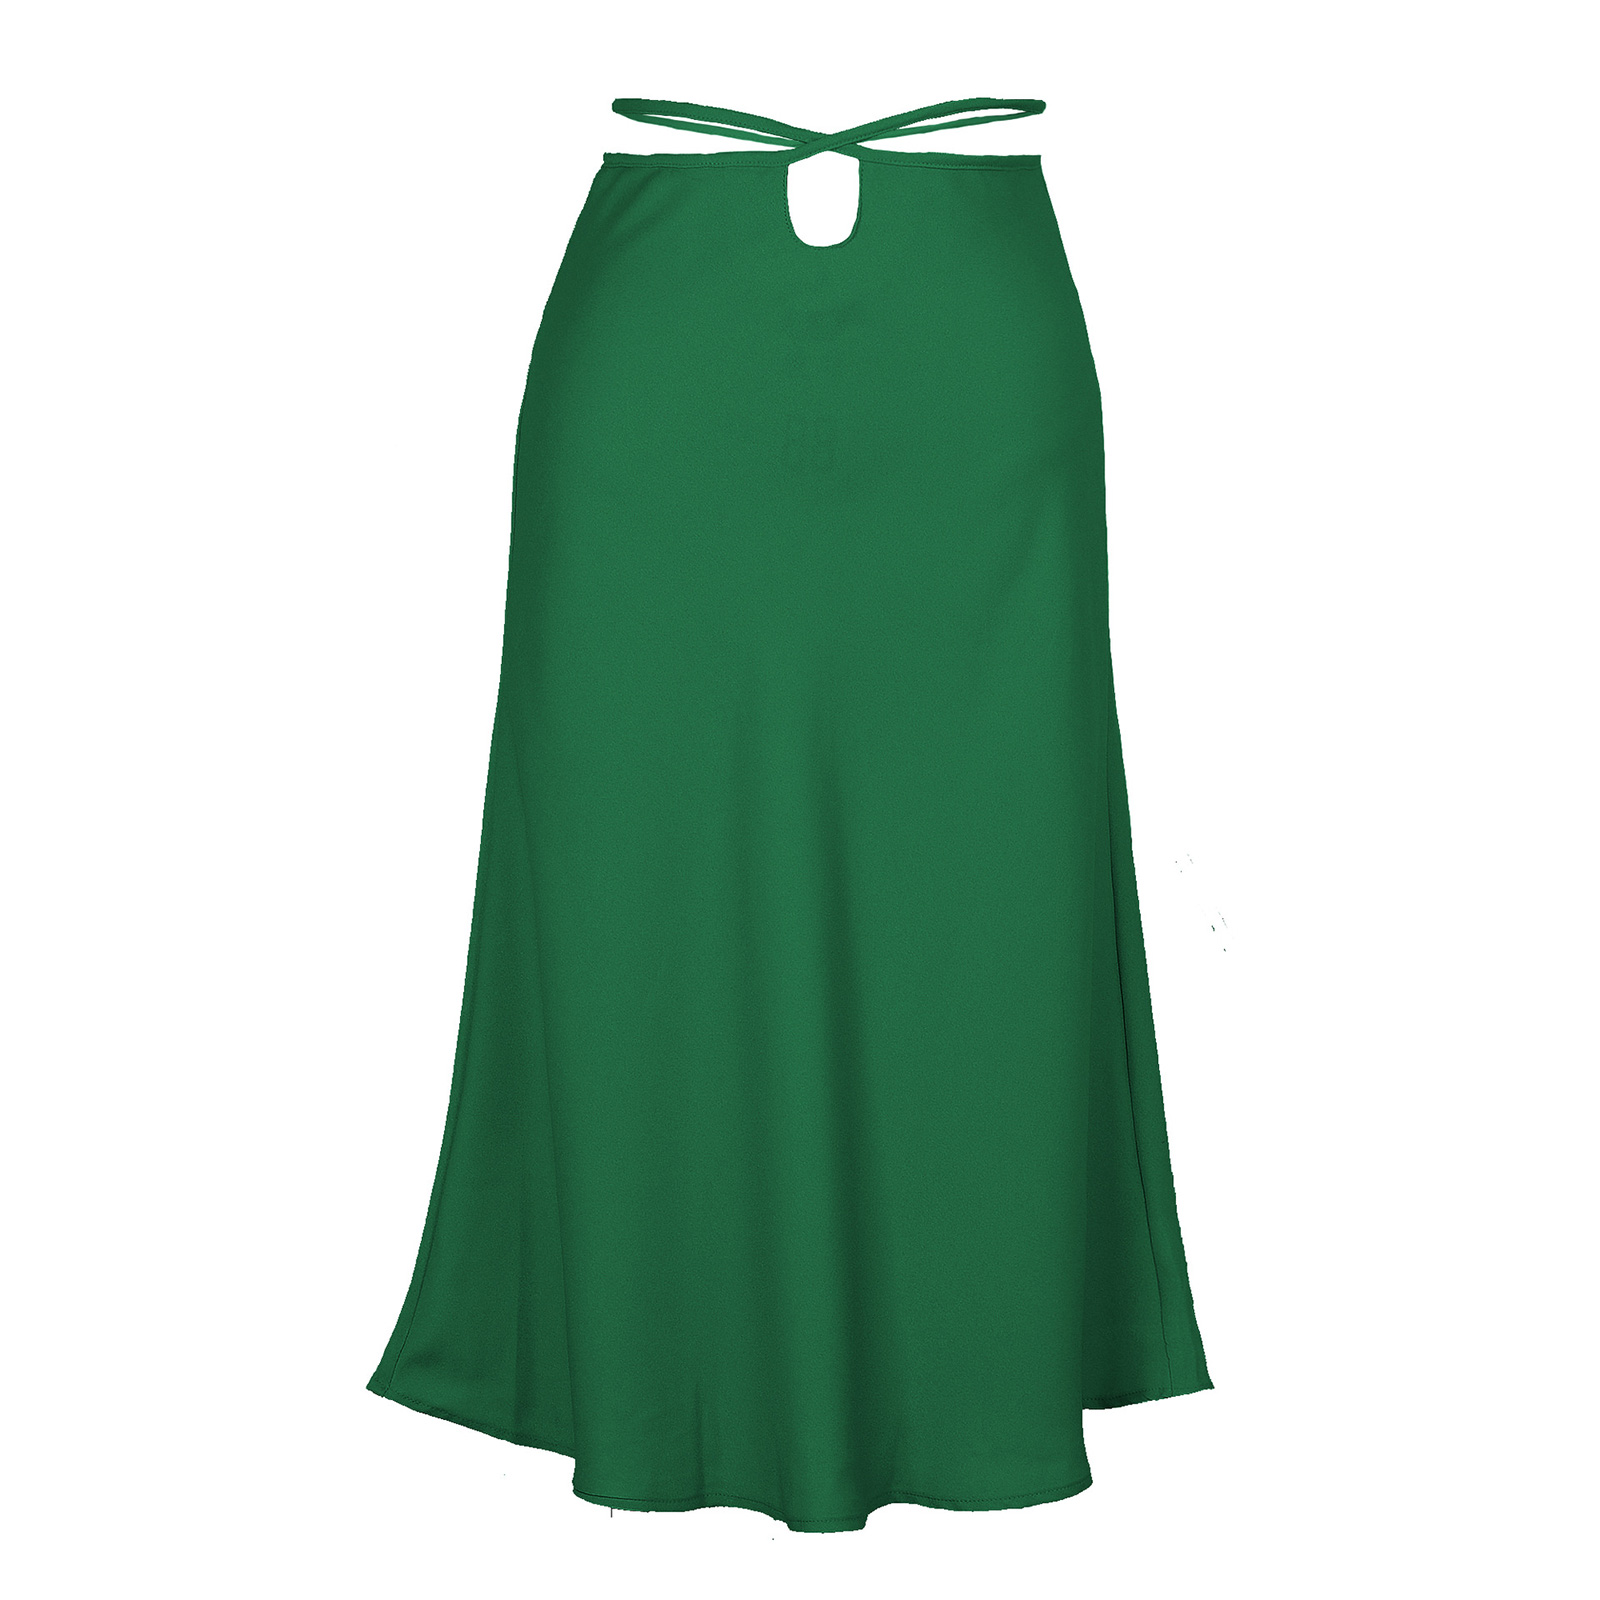 Women Maxi Skirt Wrap Pencil Zipper Long Skirts Slim Fit Solid Color Lace-up Bodycon A-line Skirt green S